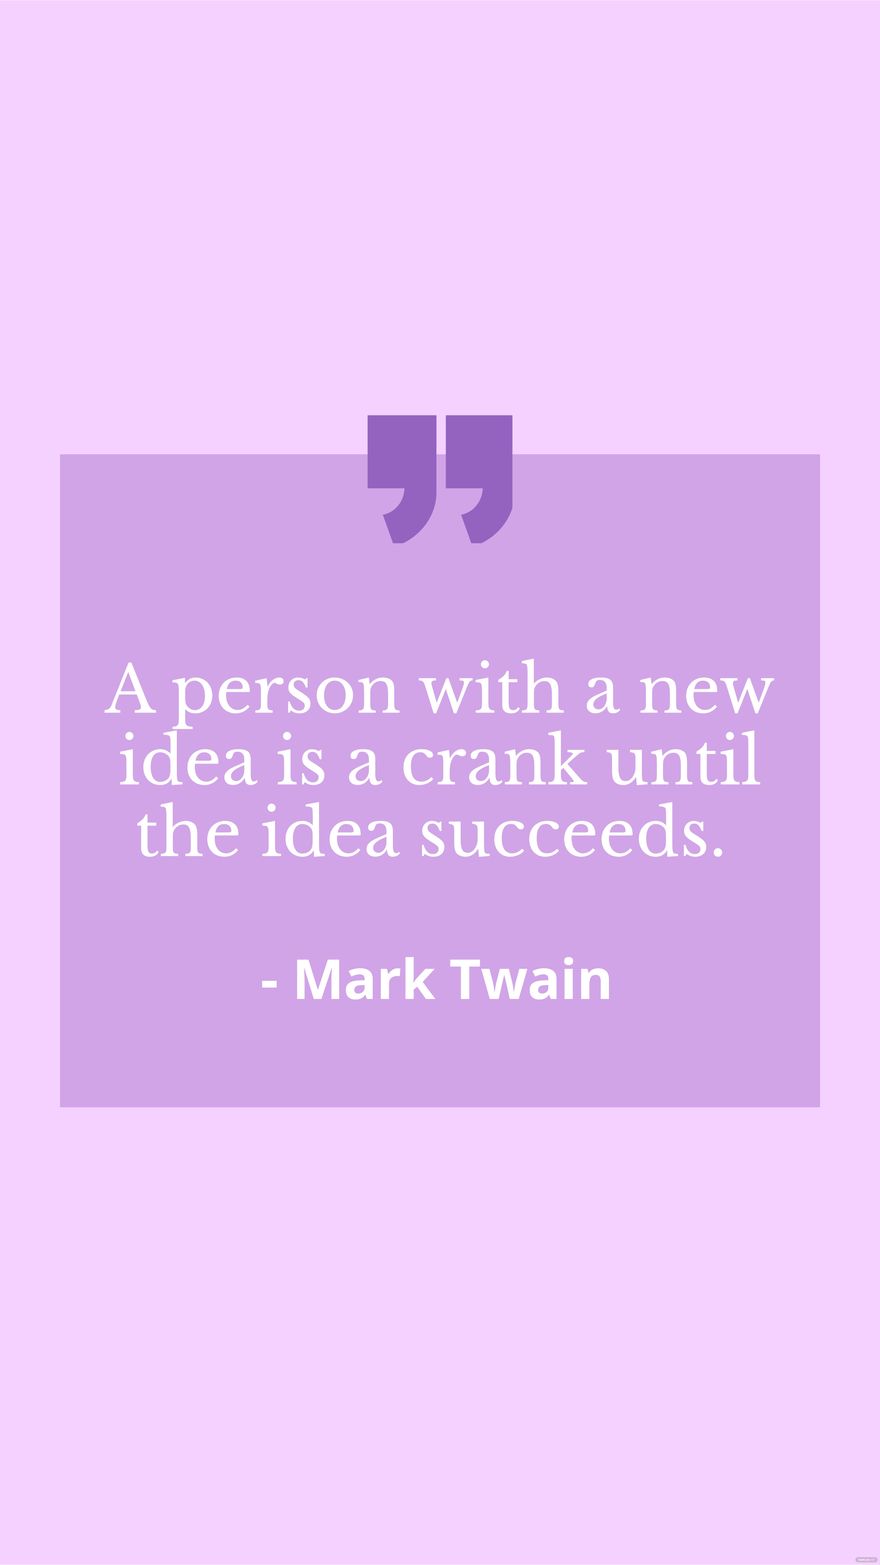 Free Mark Twain - A person with a new idea is a crank until the idea succeeds. in JPG